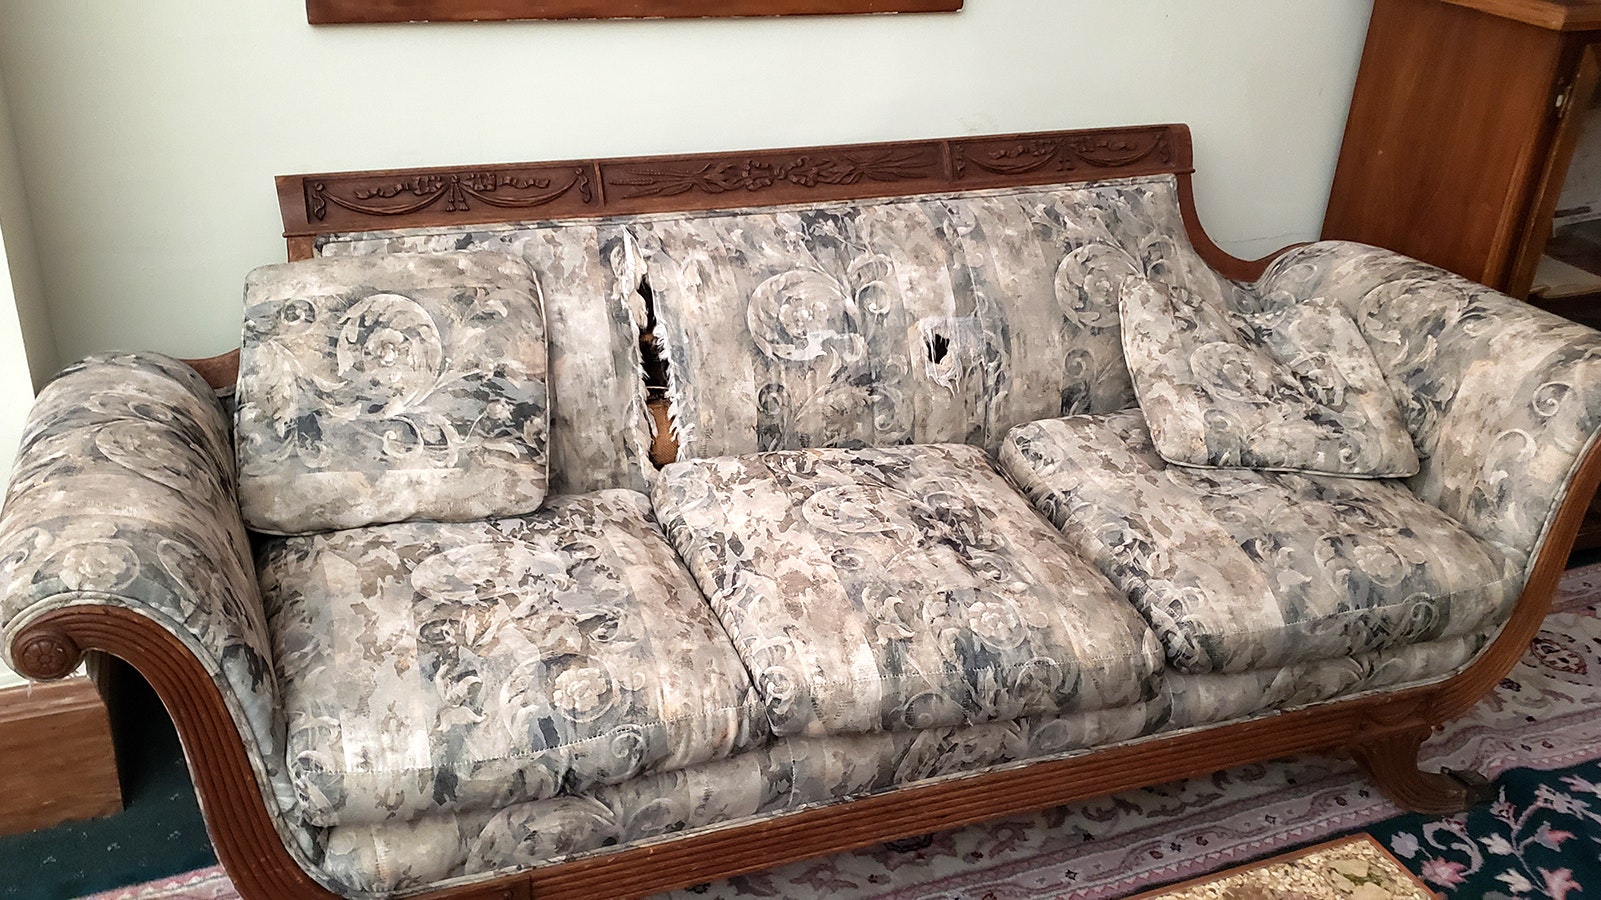 The Herbert Hoover couch looks like it should be sitting on a curb as trash instead of having an honored place in the historic Occidental Hotel. It was once owned by President Herbert Hoover, and popular lore has it the rips and tears in it were caused by fishhooks Hoover would keep in his pockets.